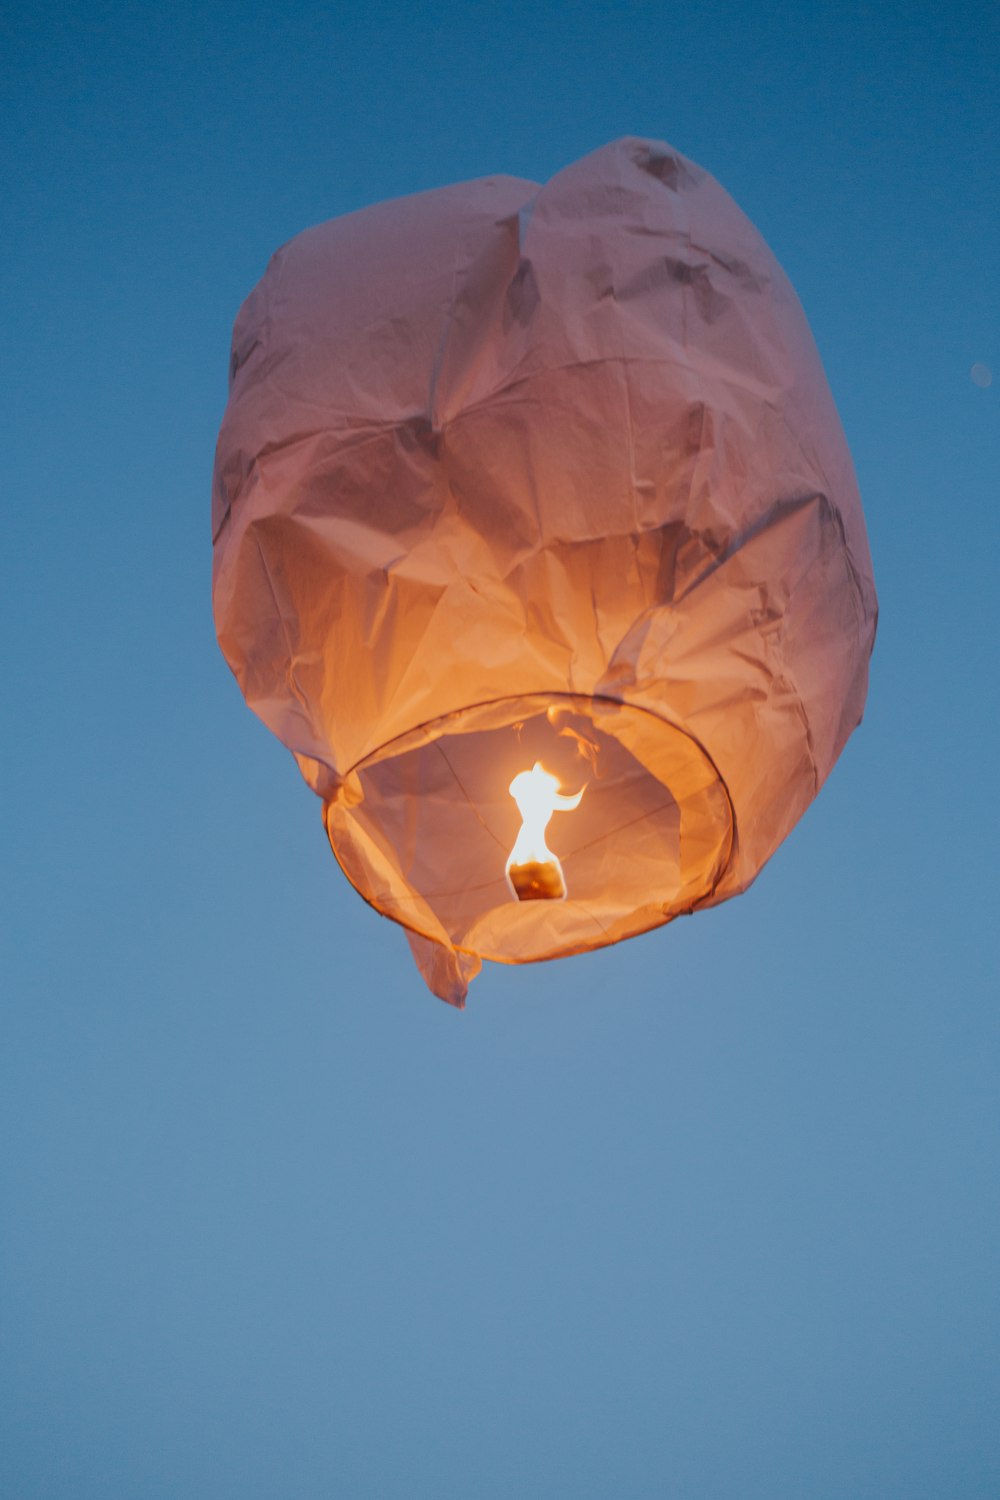 a paper lantern floating in the air with a blue sky in the background